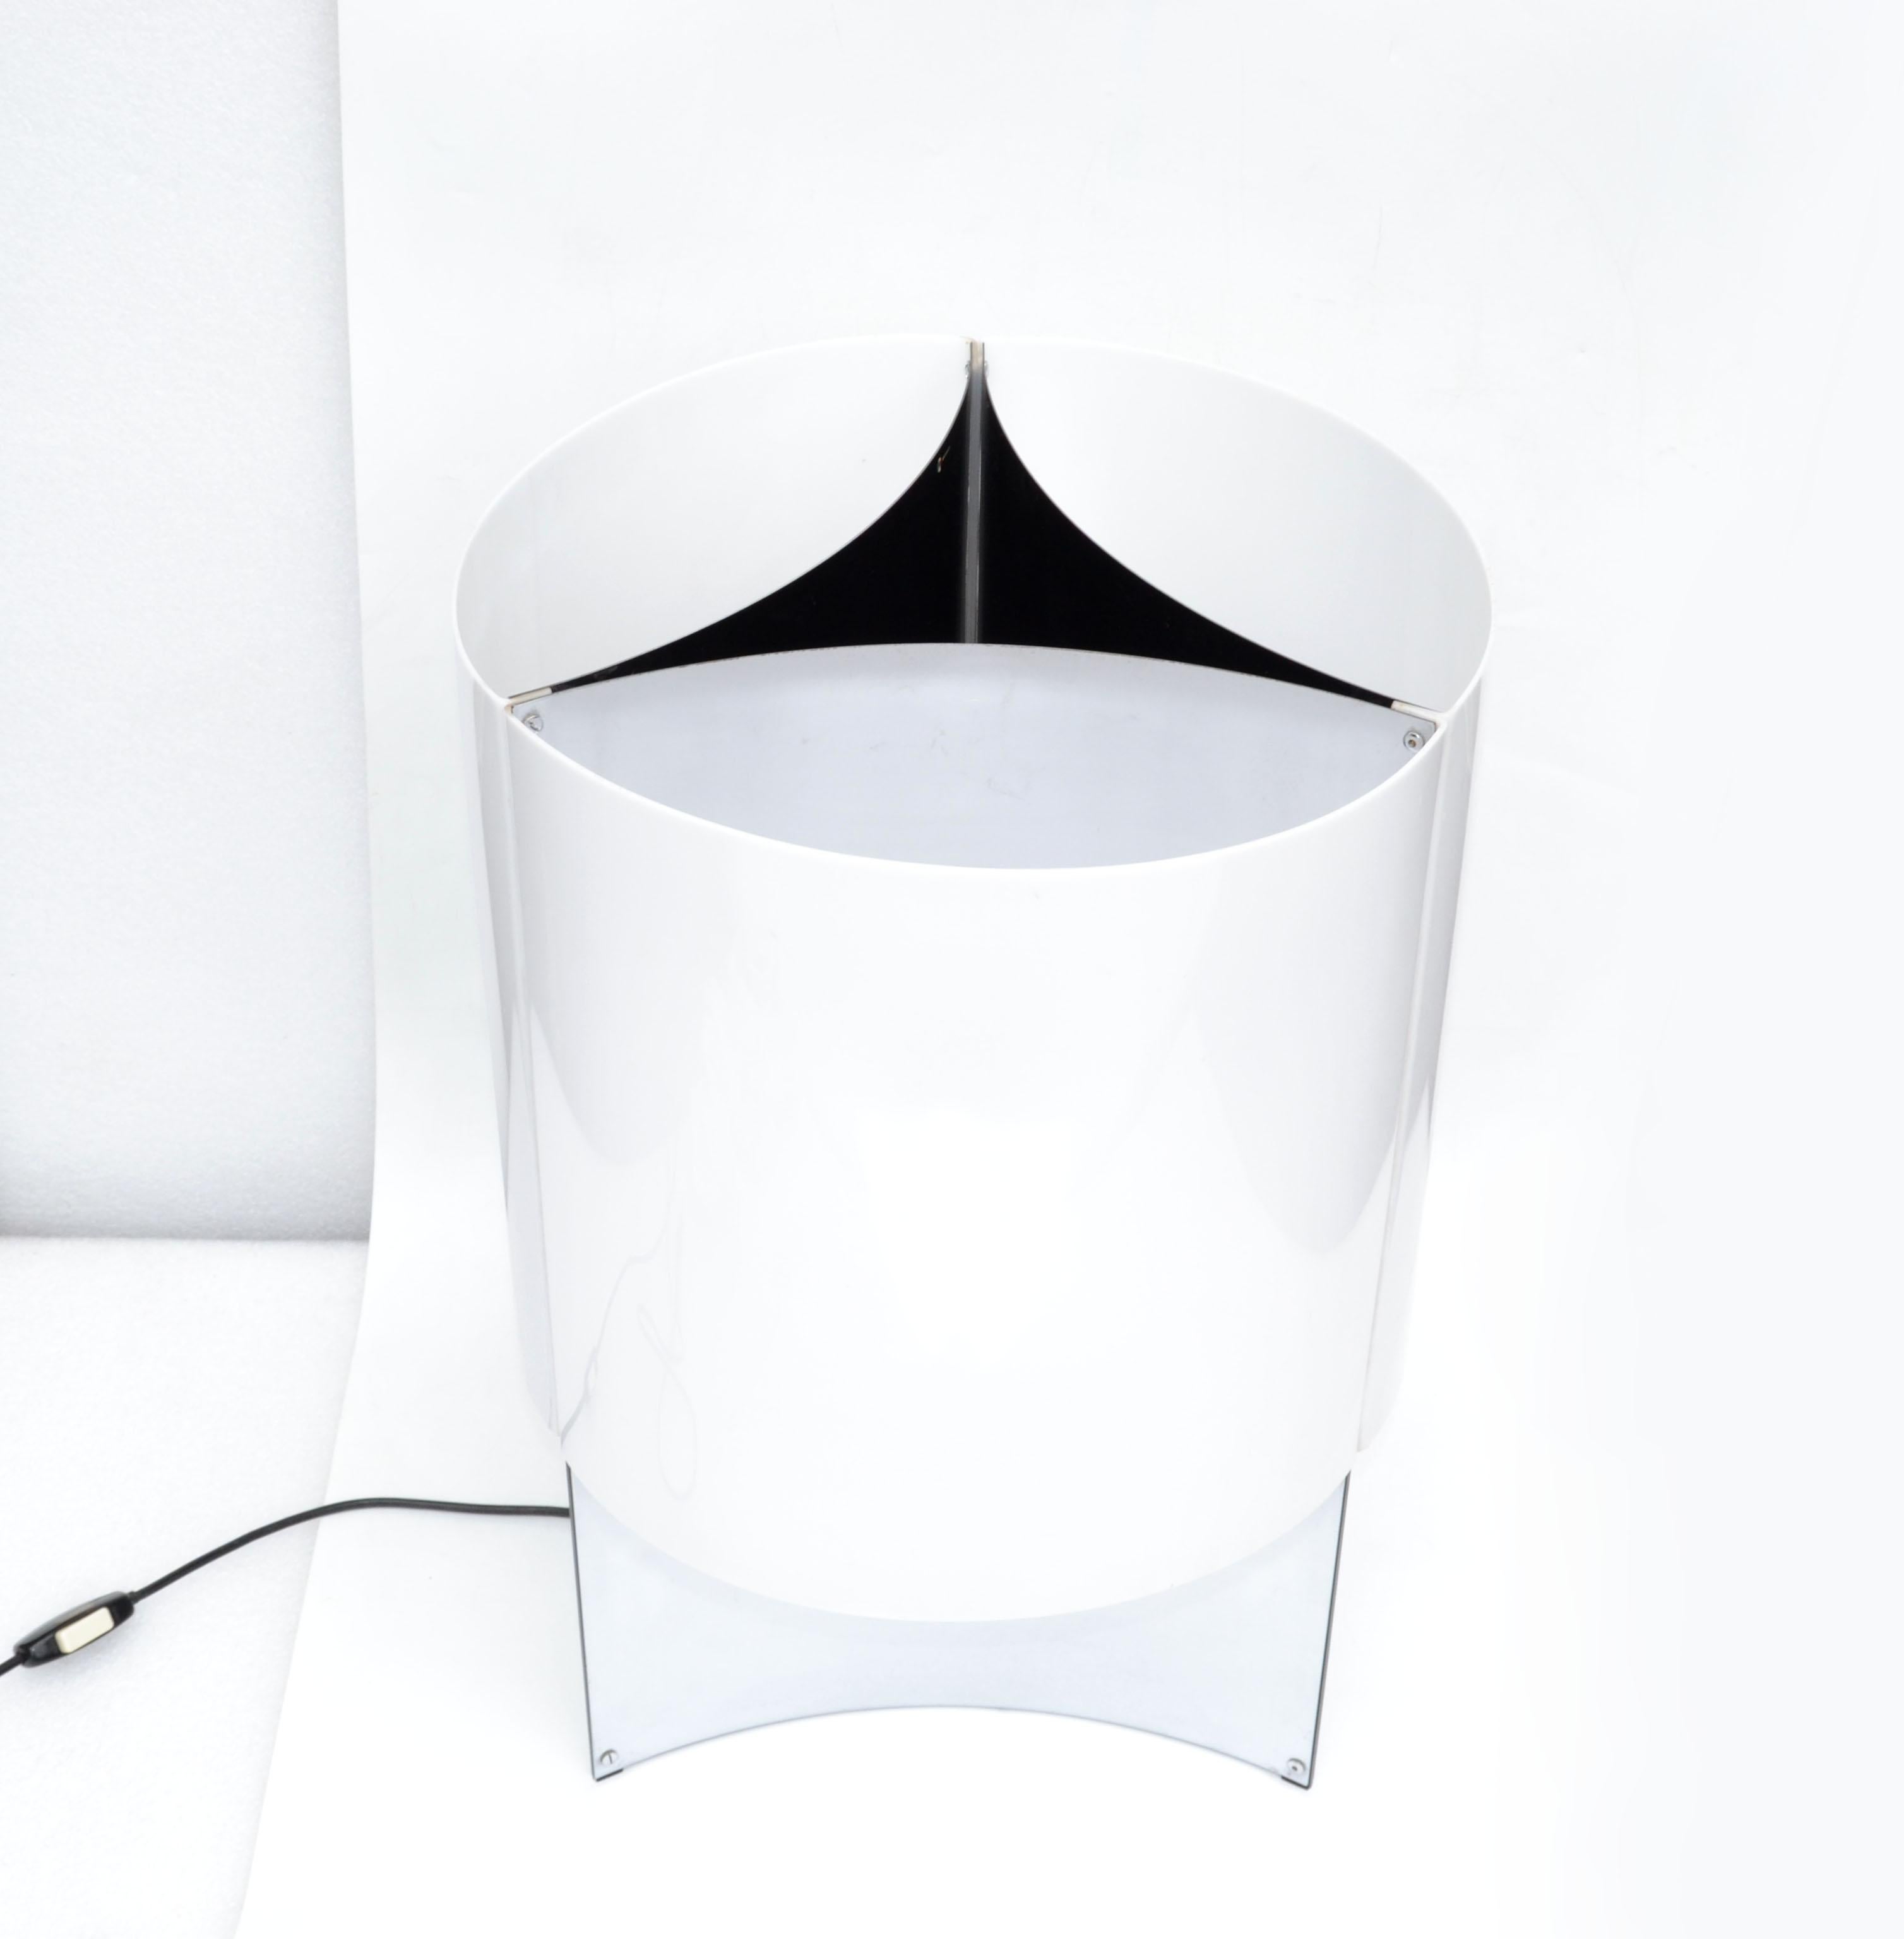 1965 Arteluce Large Chrome & Acrylic Table Lamp by Massimo Vignelli Italy For Sale 2